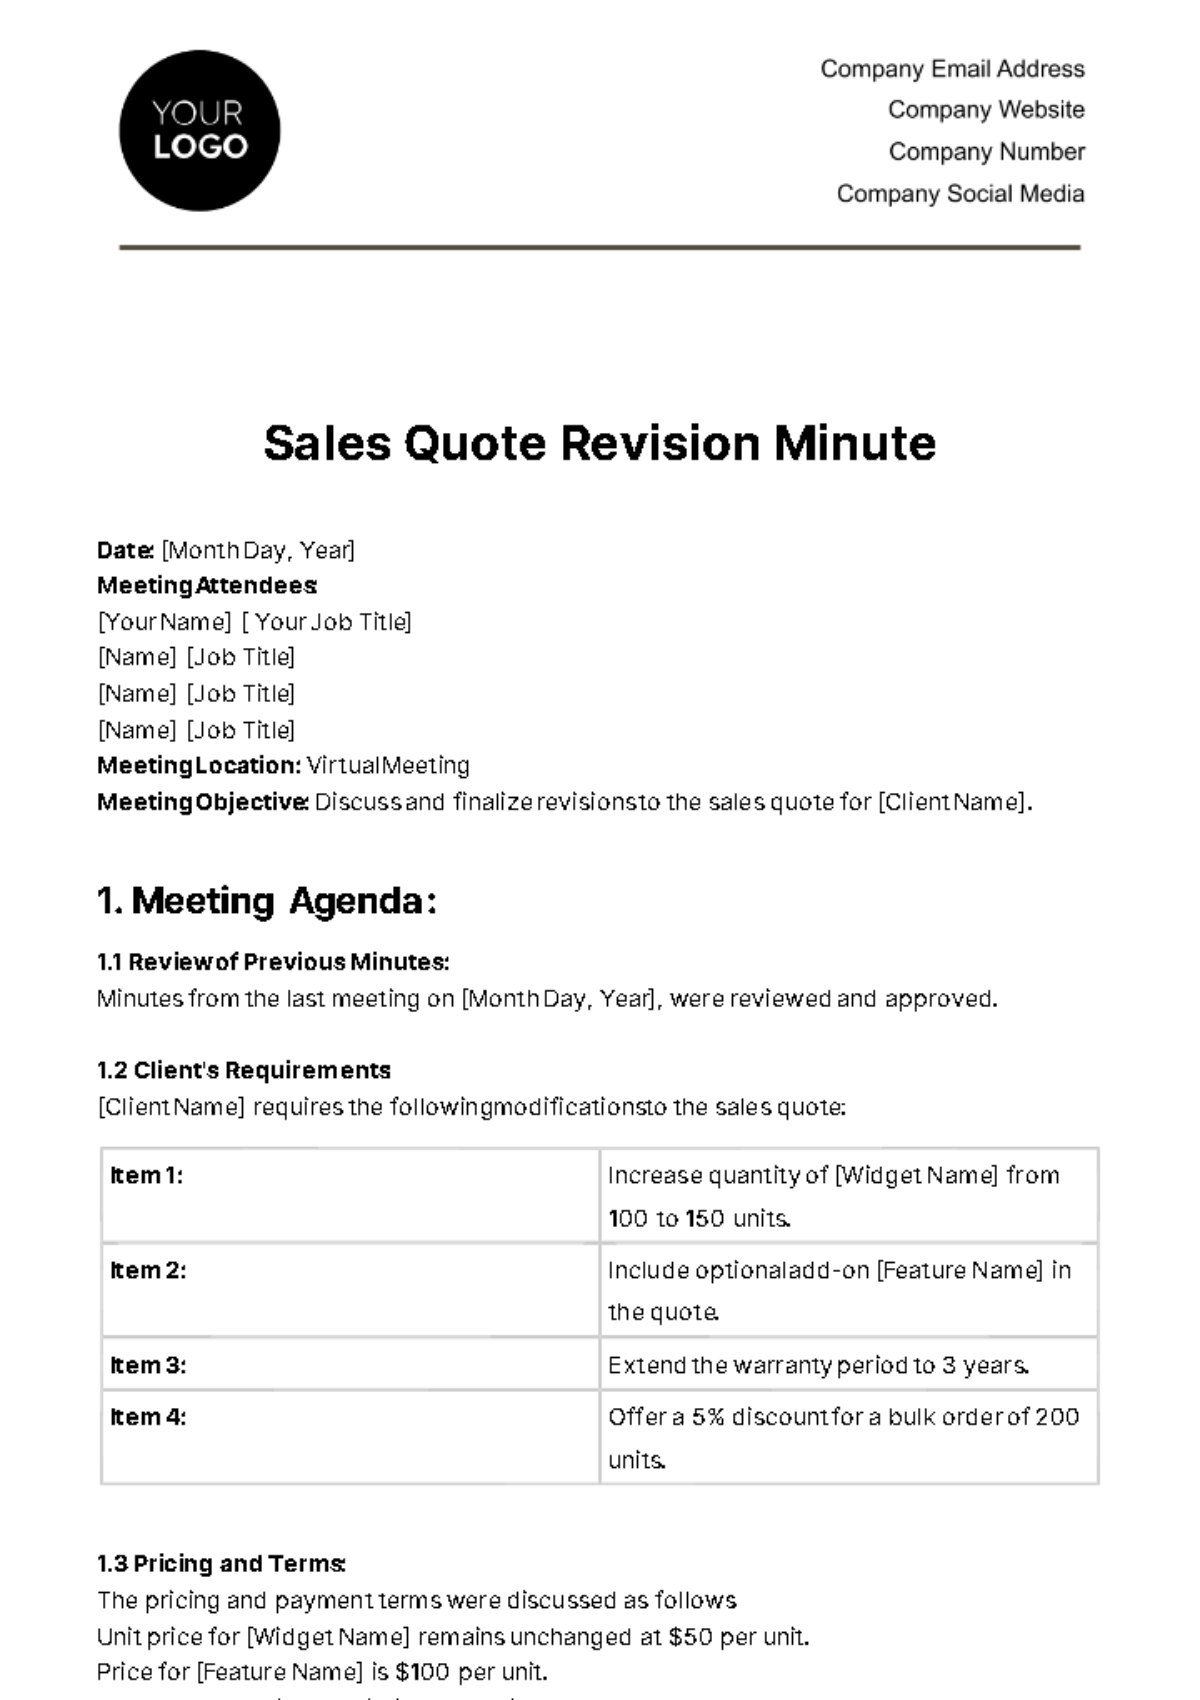 Sales Quote Revision Minute Template